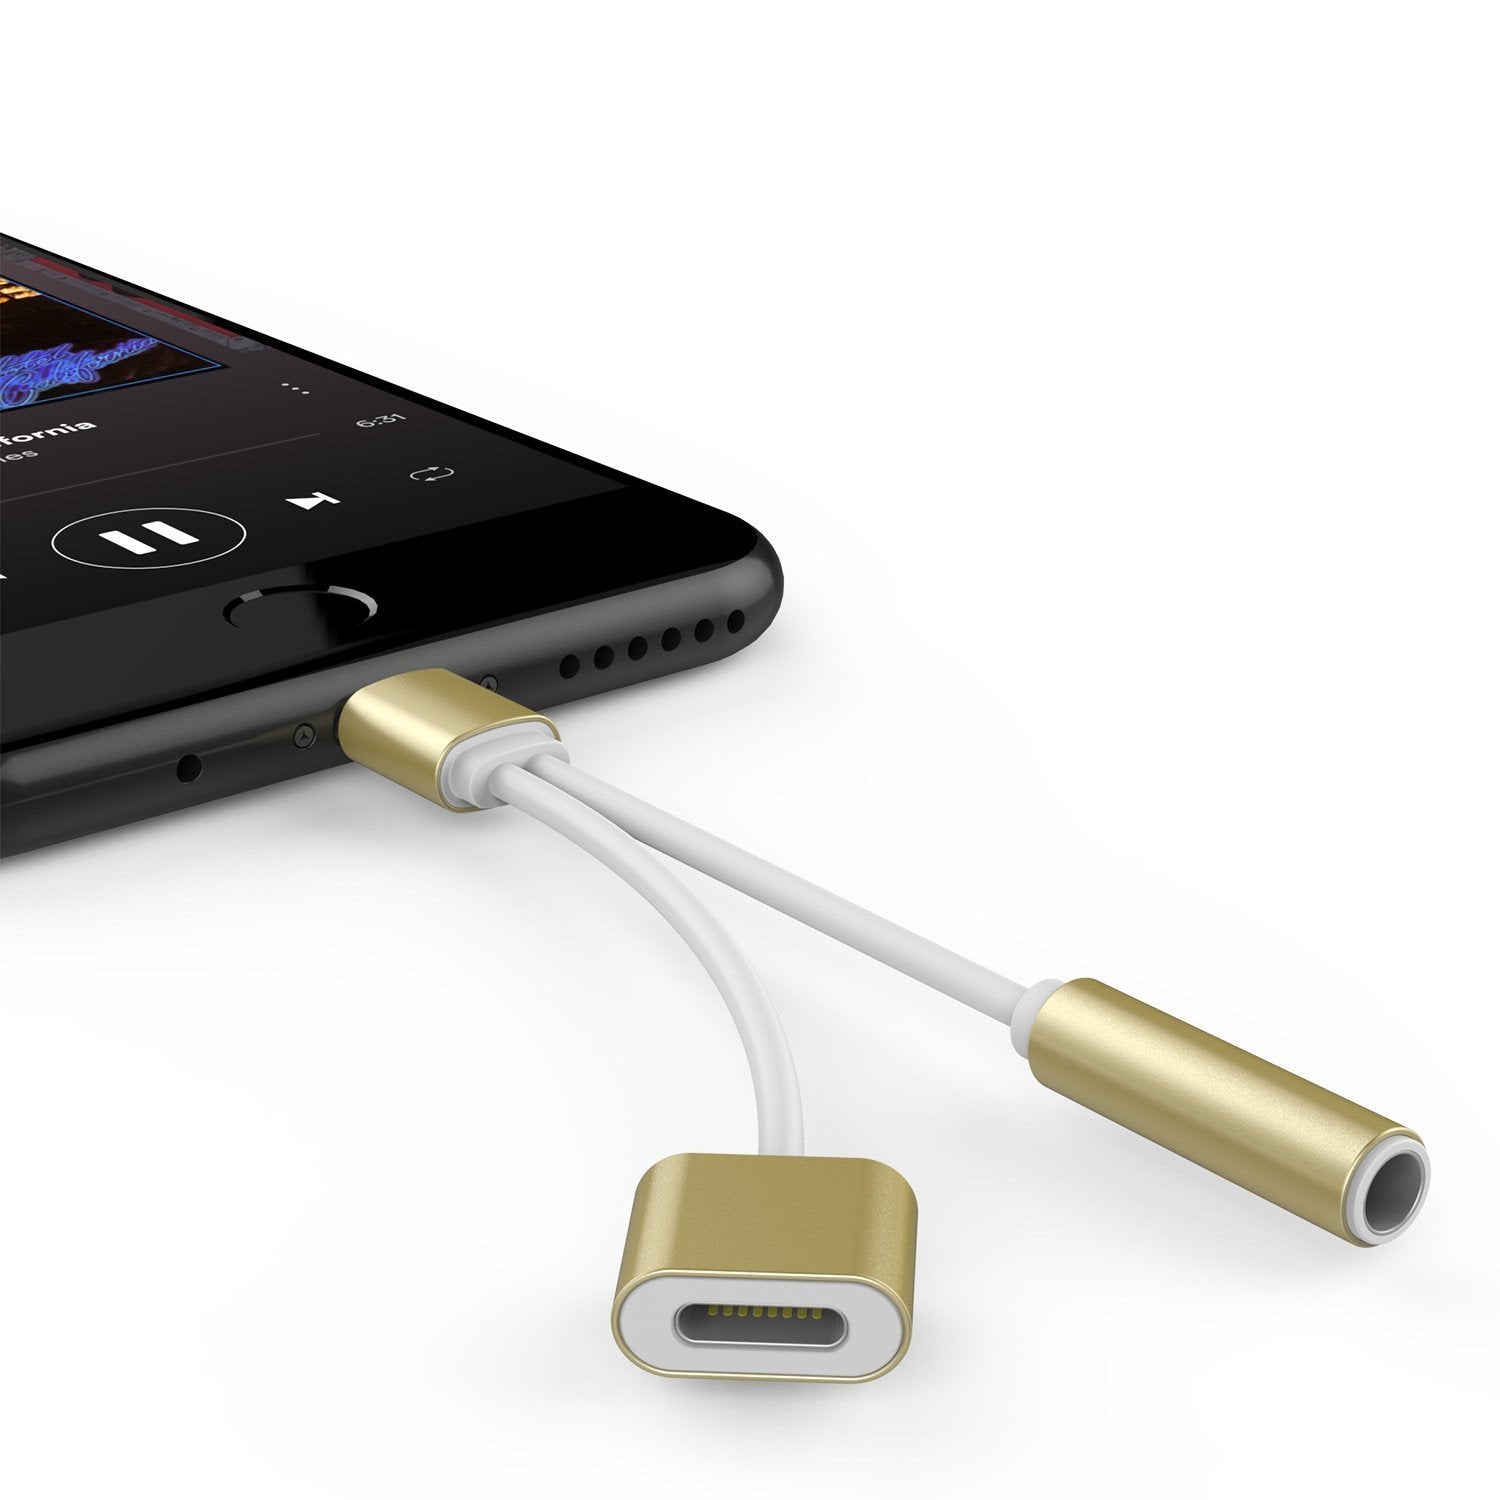 PUNKZAP Lightning Adapter Cable 2 in 1 Splitter Charger with 3.5mm Earphone AUX Jack|Charge & Listen to your Apple iPhone [GOLD] - PunkCase NZ